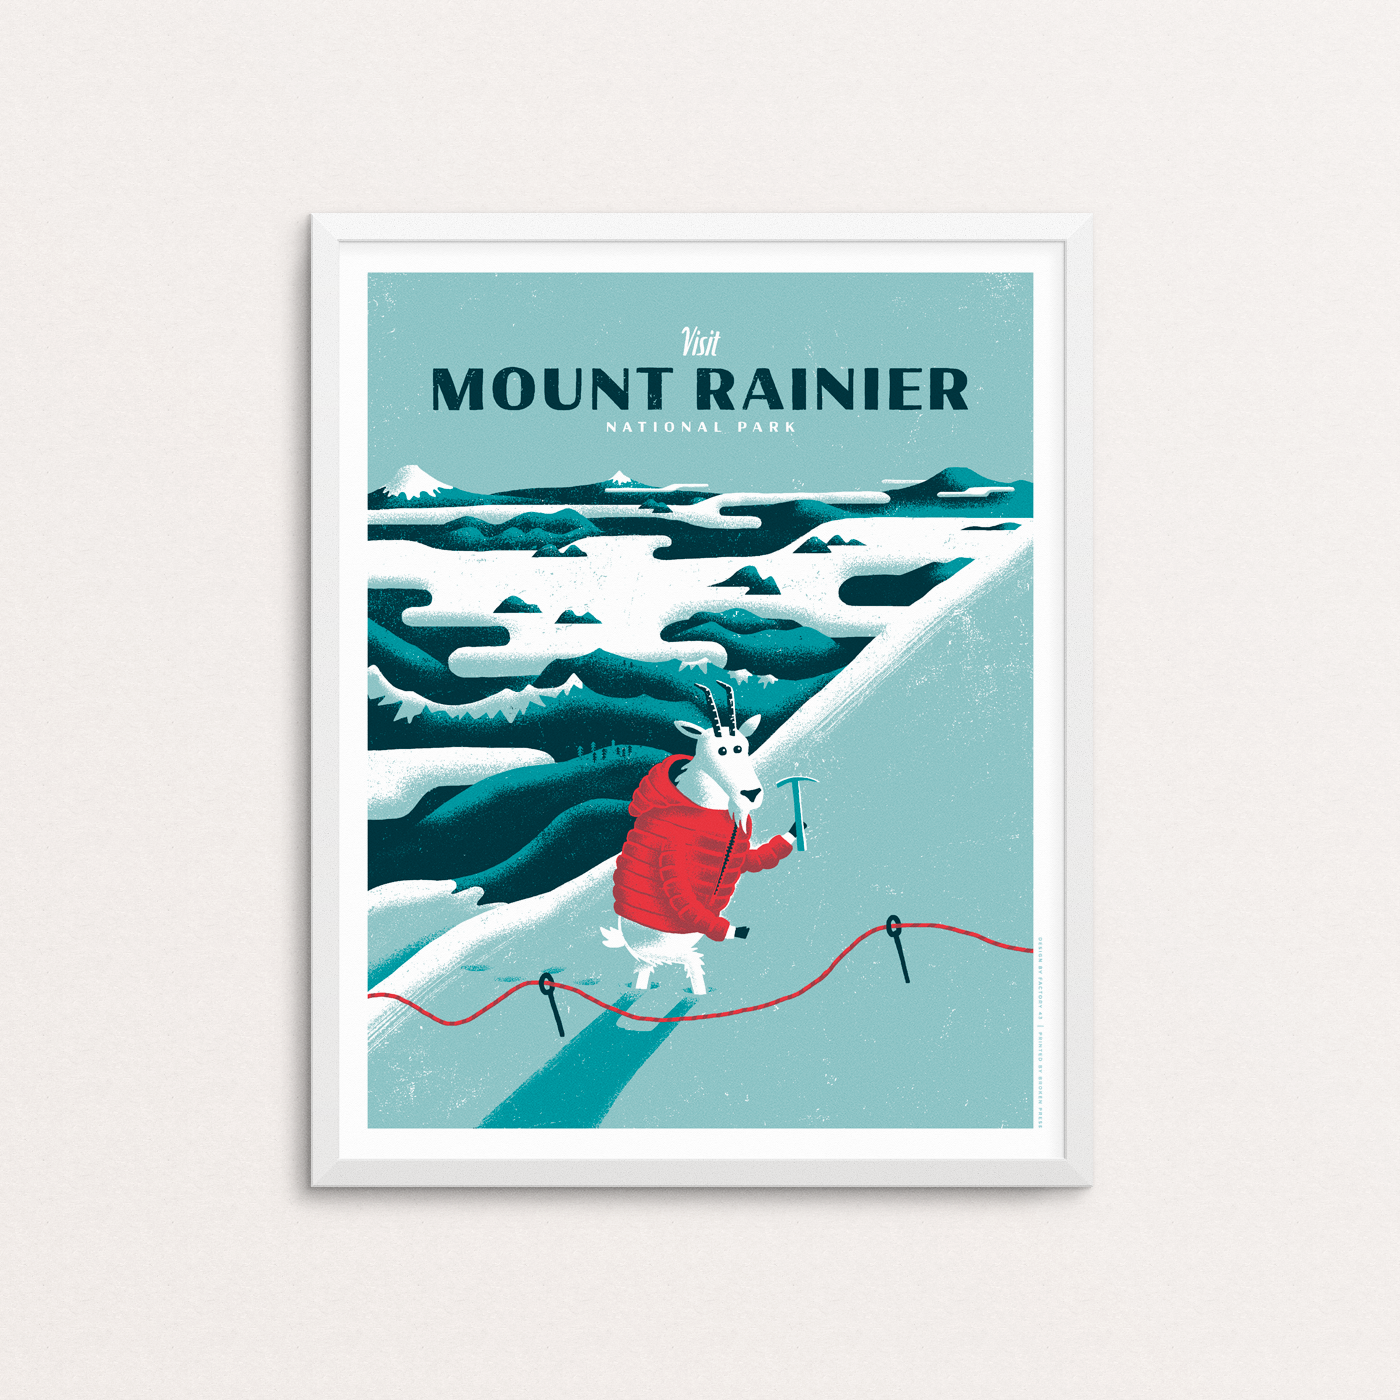 Mount Ranier National Park screenprinted poster print featuring mountain goat in red puffer jacket climbing the Washington state icon. Poster is shown in a white frame.